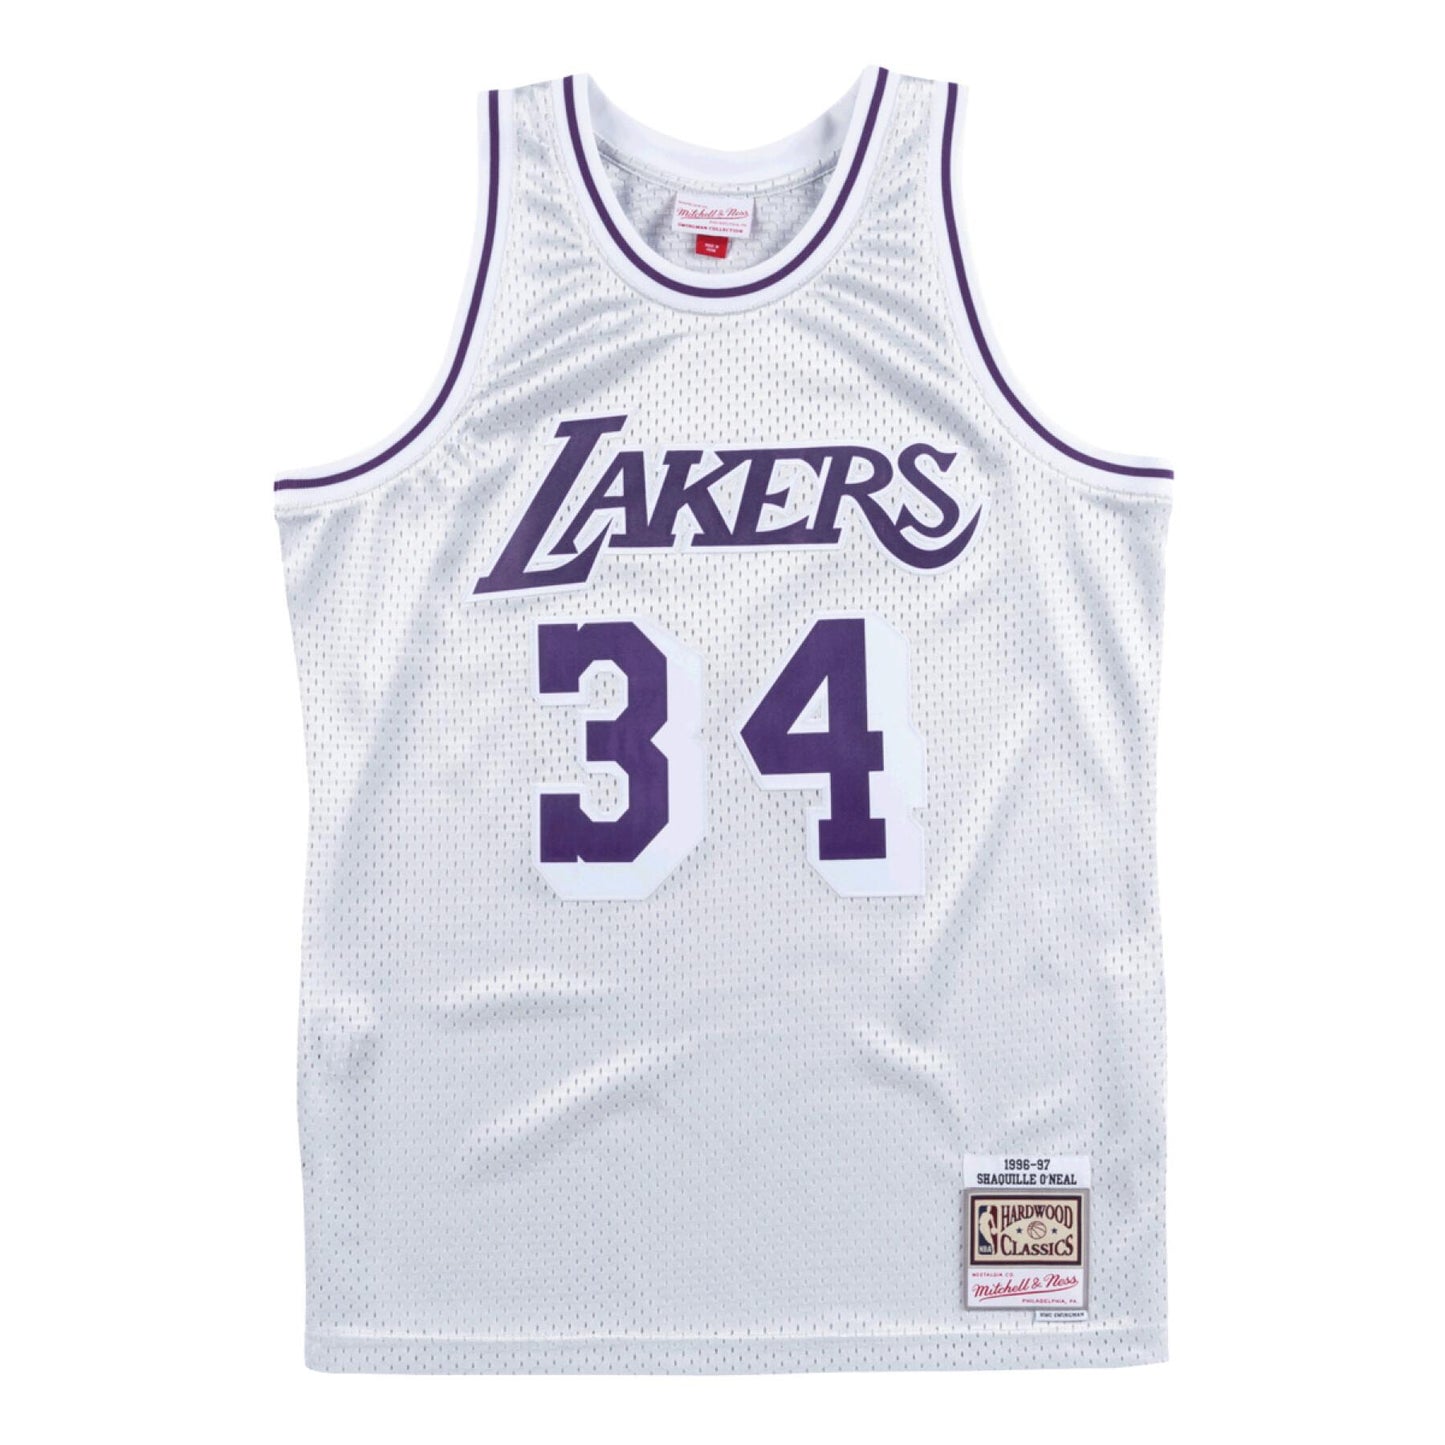 NBA Platinum Swingman Jersey Los Angeles Lakers 196-97 Shaquille O'Neal